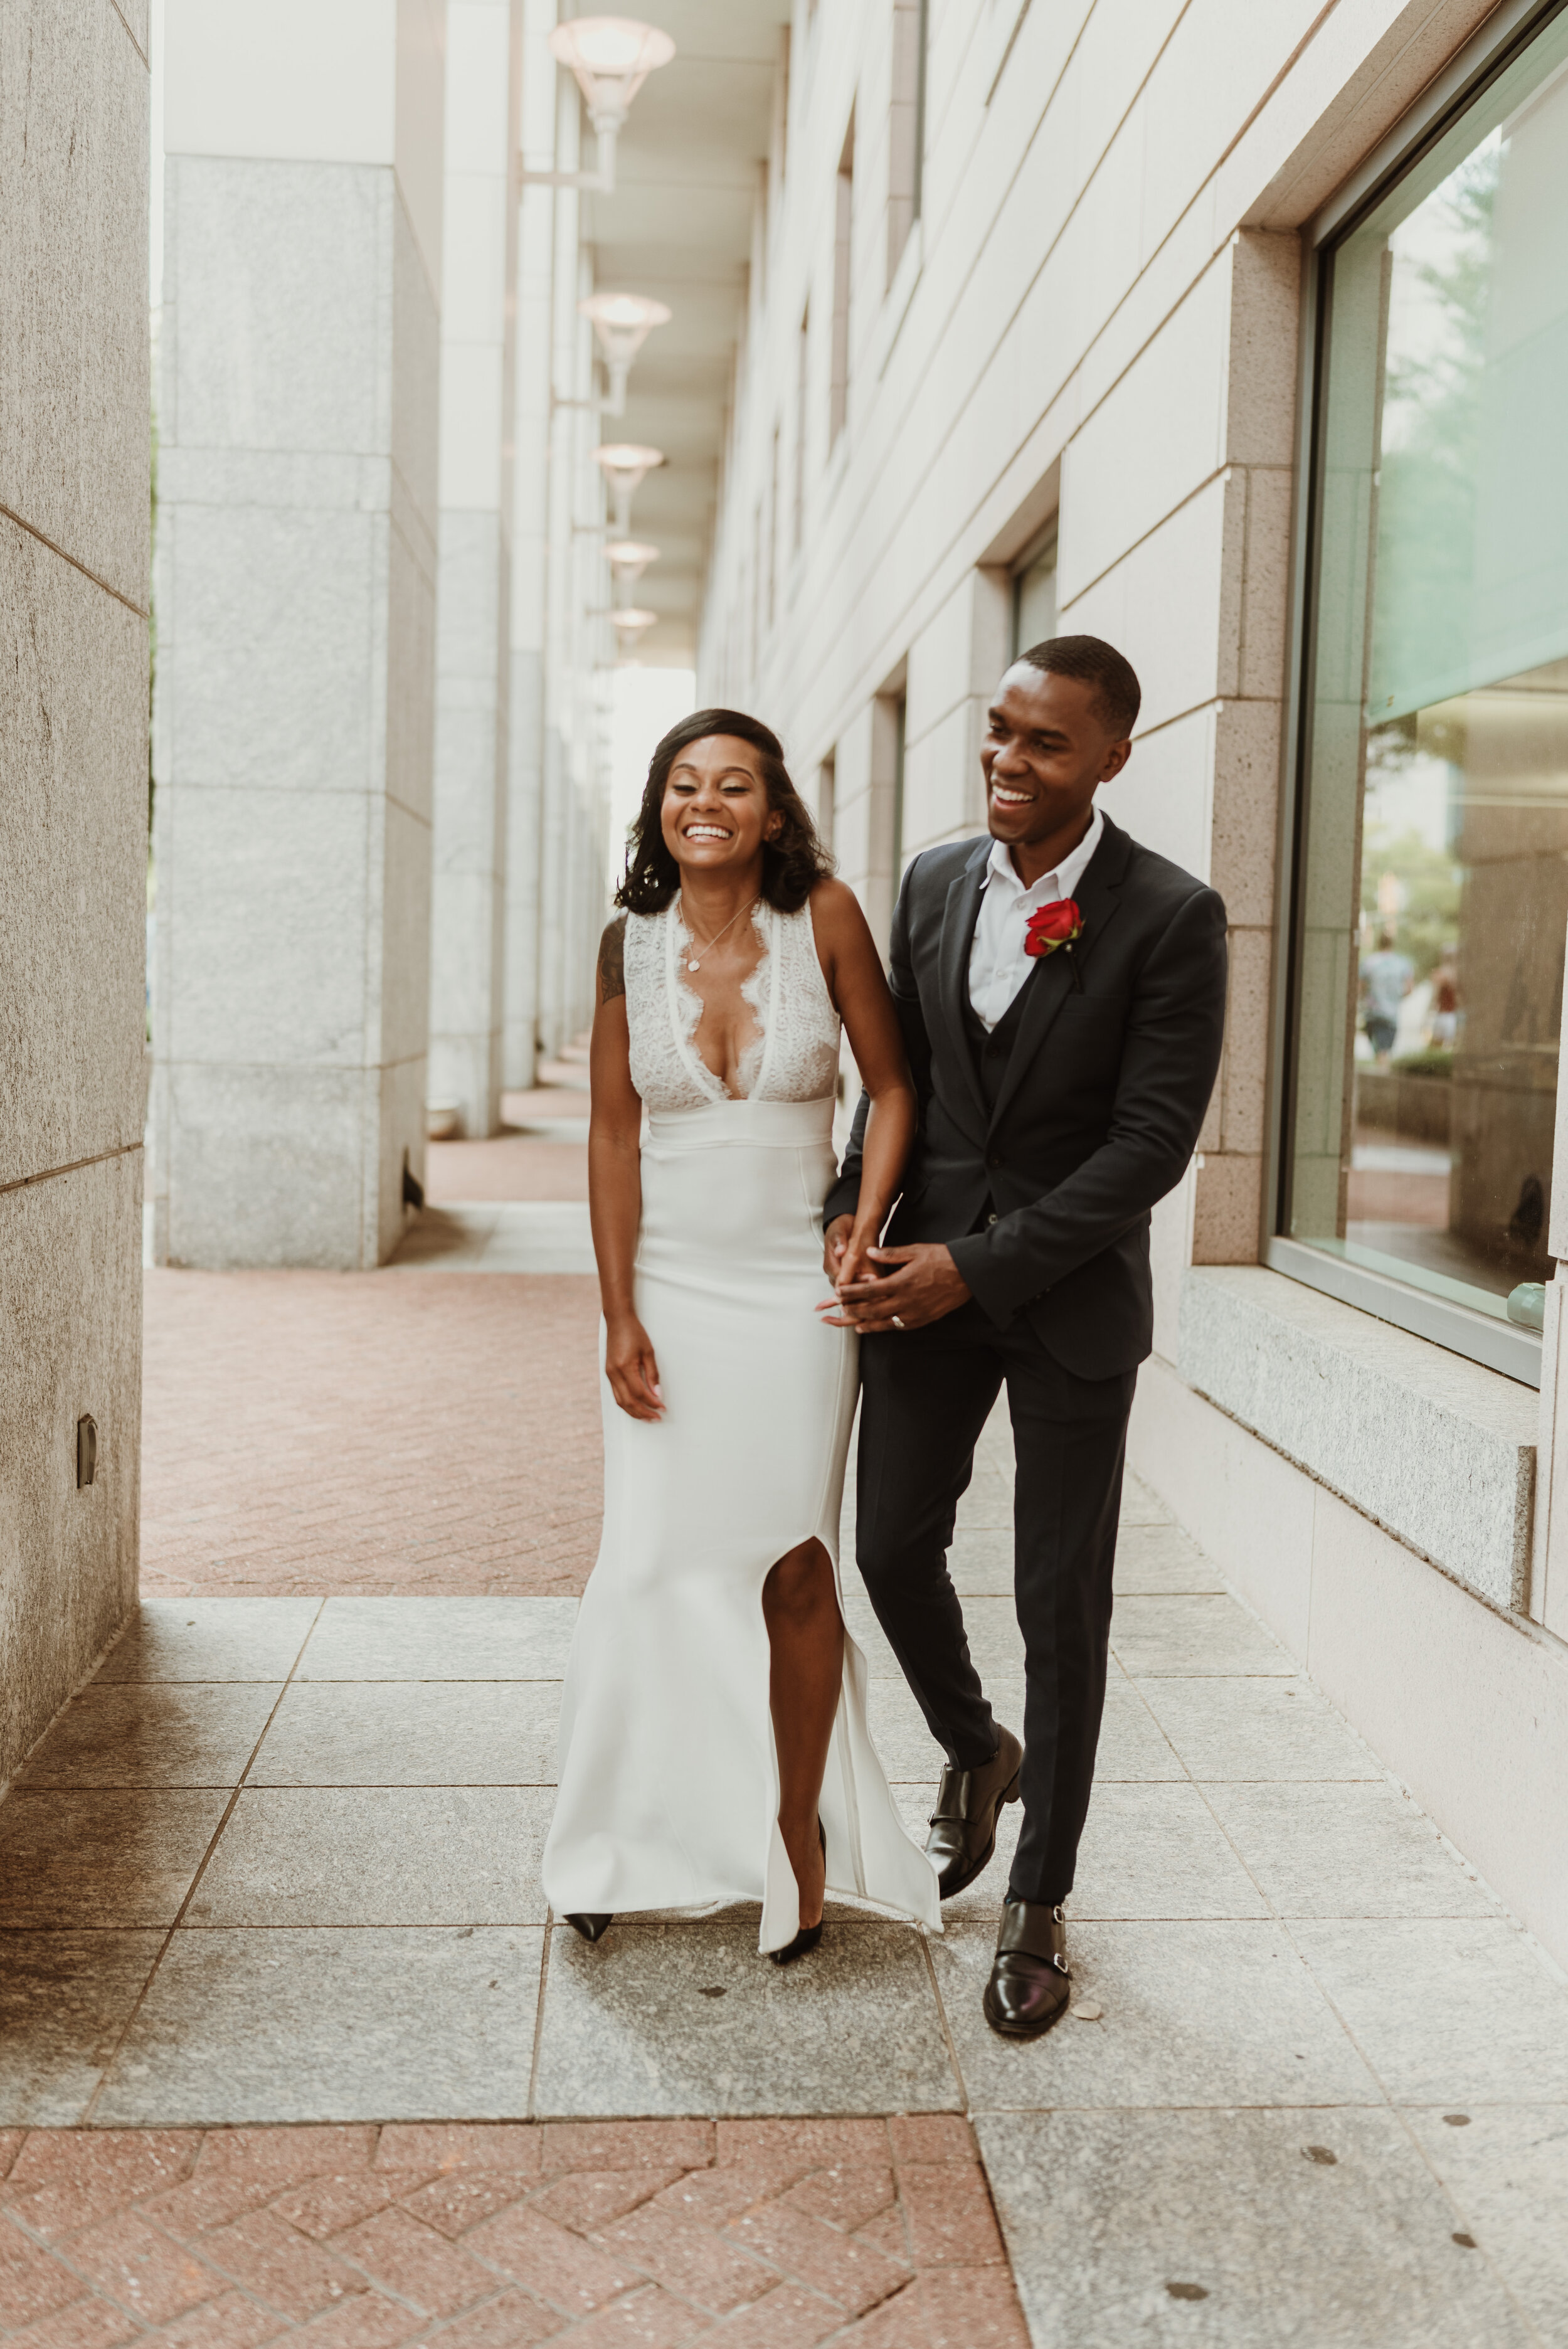 Interracial marriages in charlotte nc